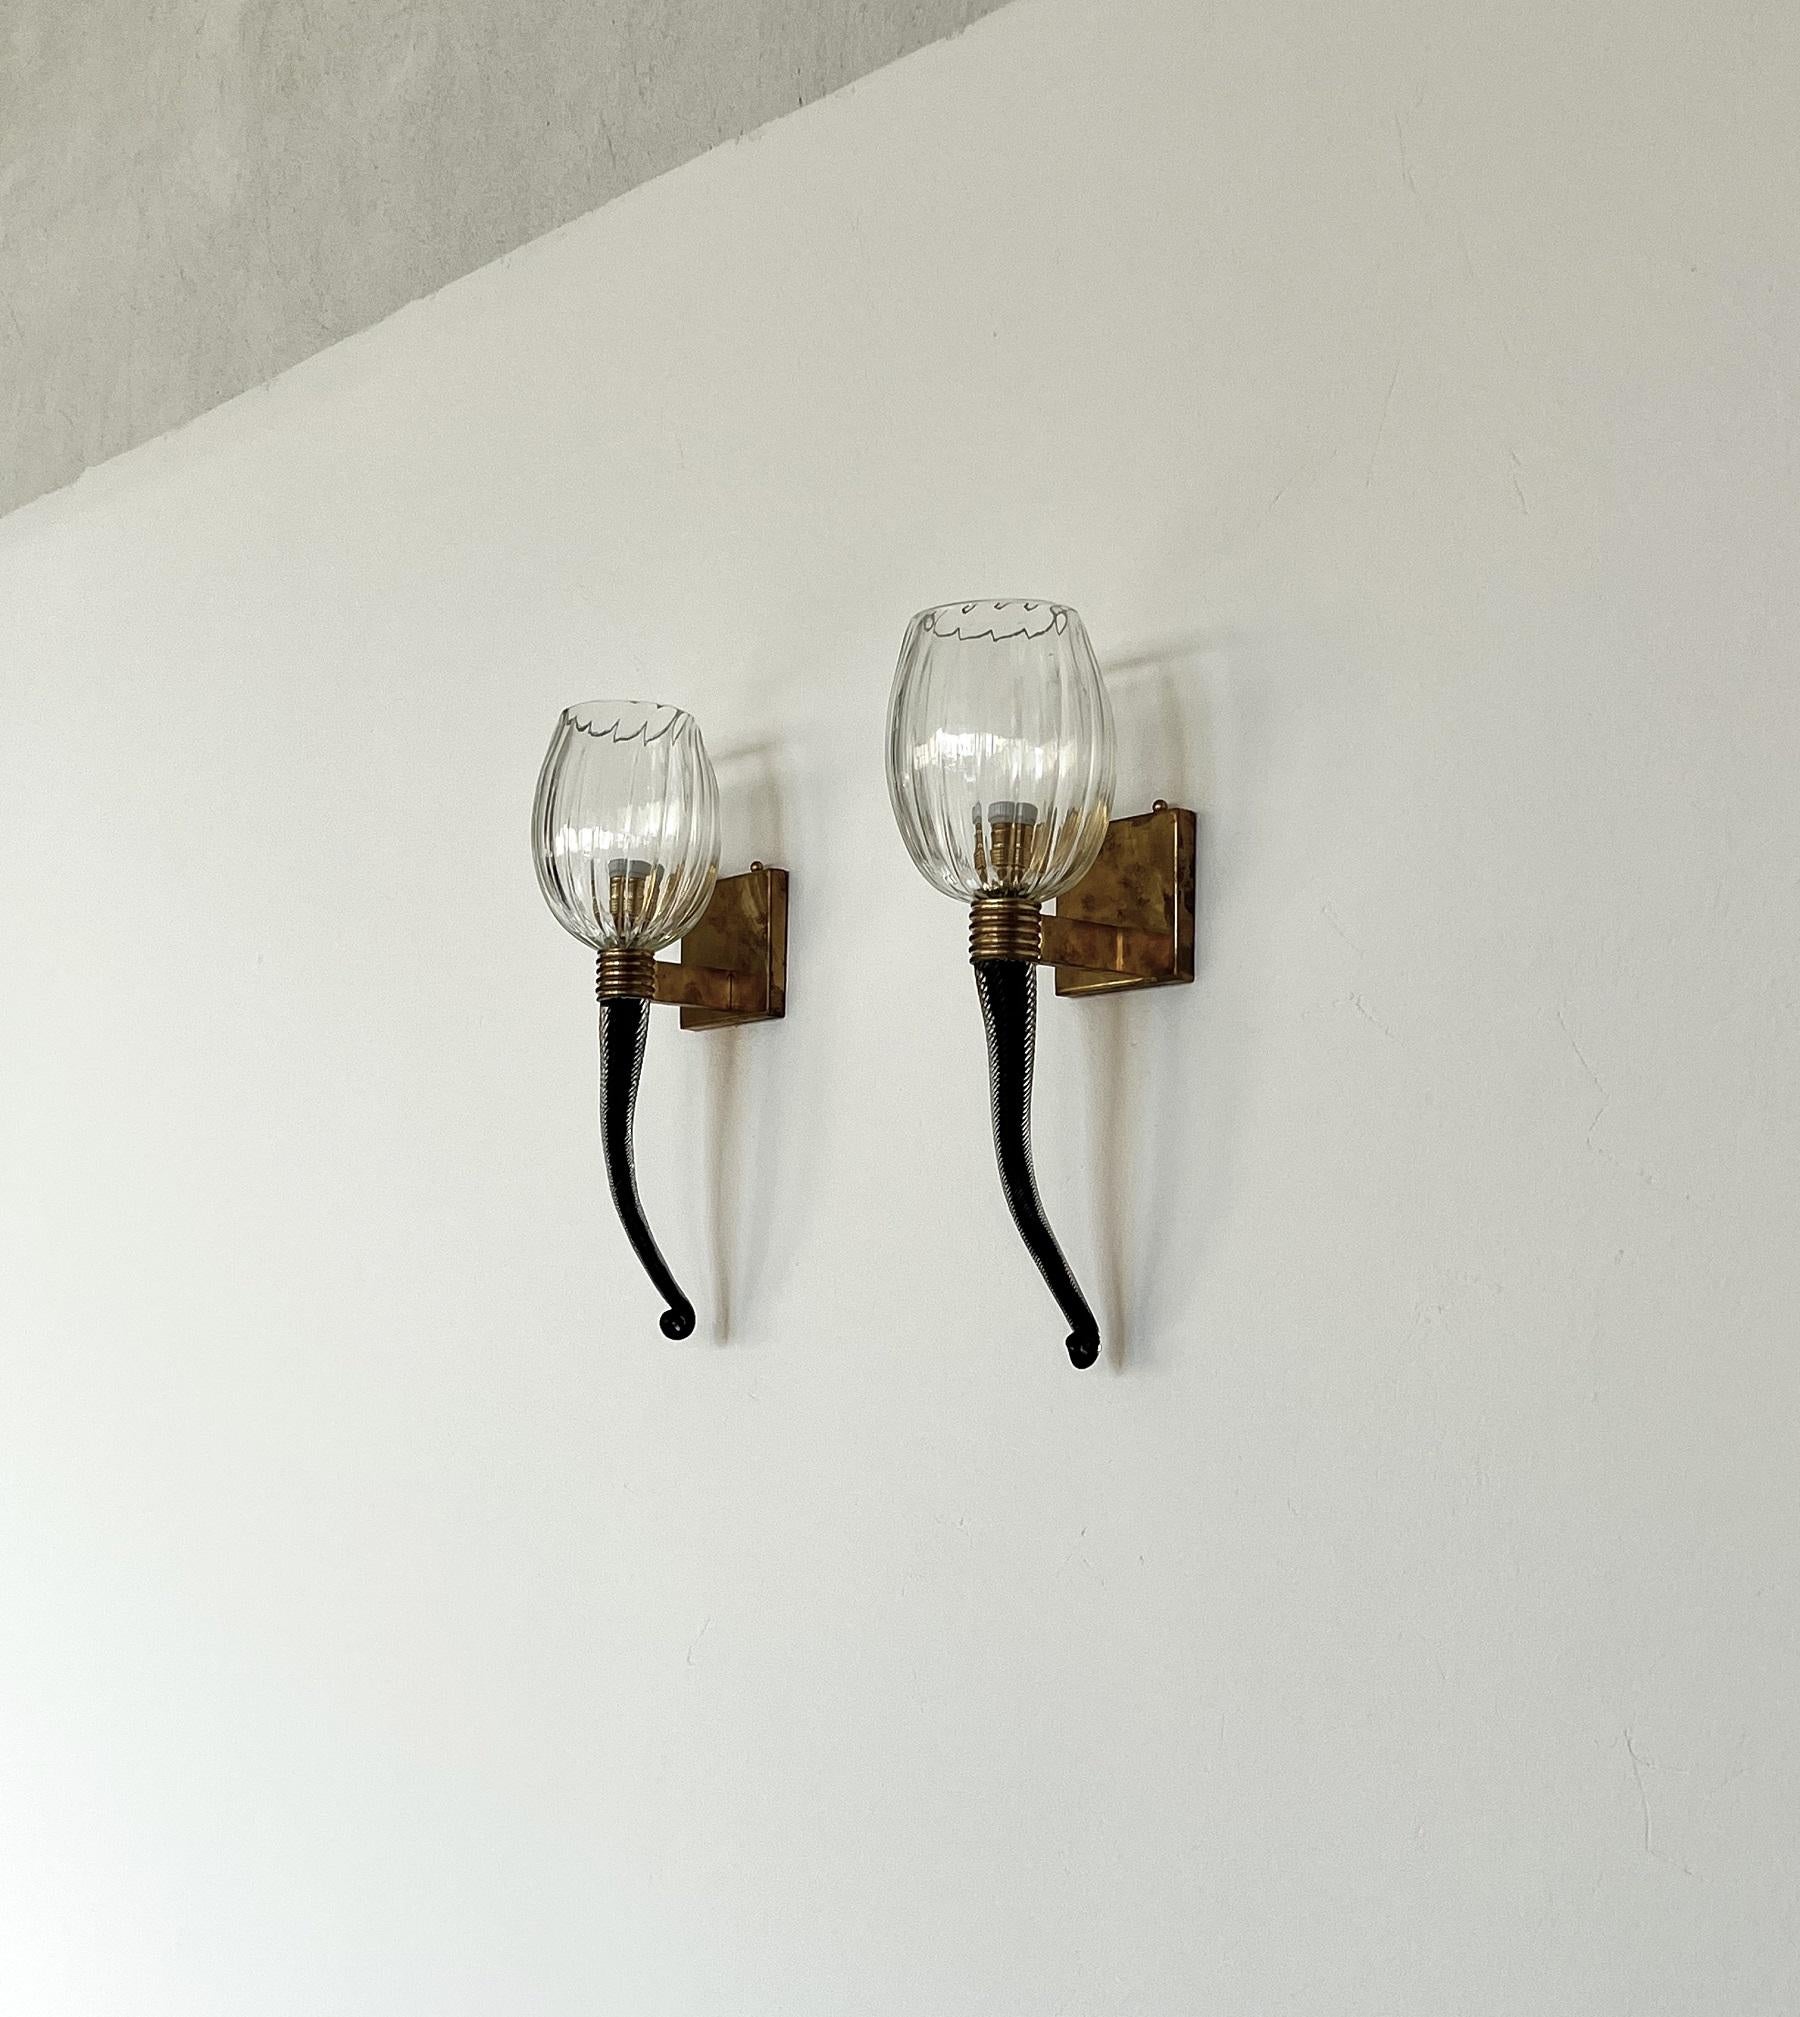 Italian Large Murano Glass Wall Lights or Sconces in Barovier Toso Style, 1990s For Sale 5